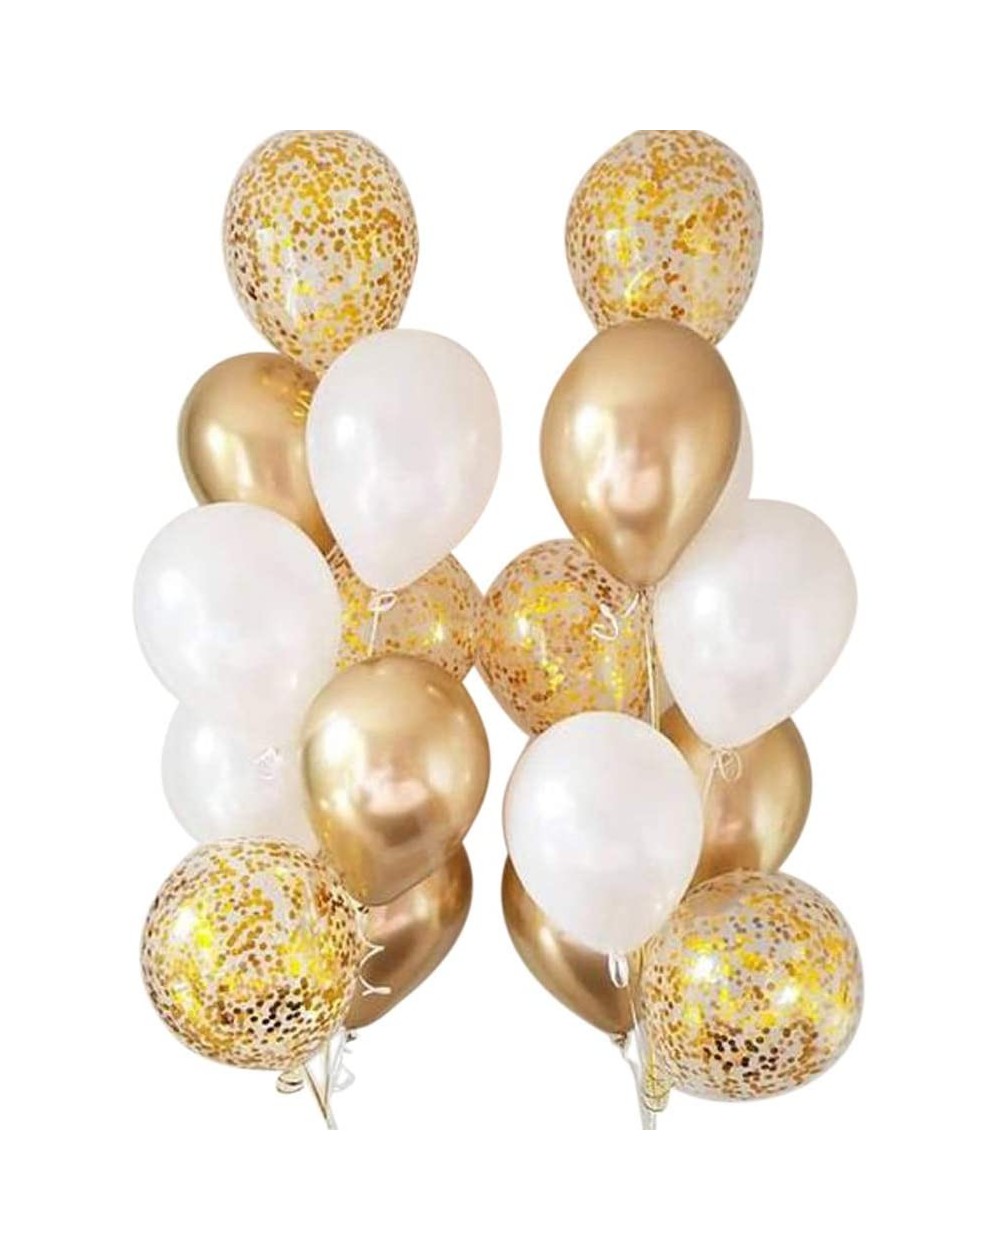 Balloons Set of 18 Chrome Gold Confetti Pearl Balloons-12 Inches Party Balloons - CY18OQ0MZSS $10.10